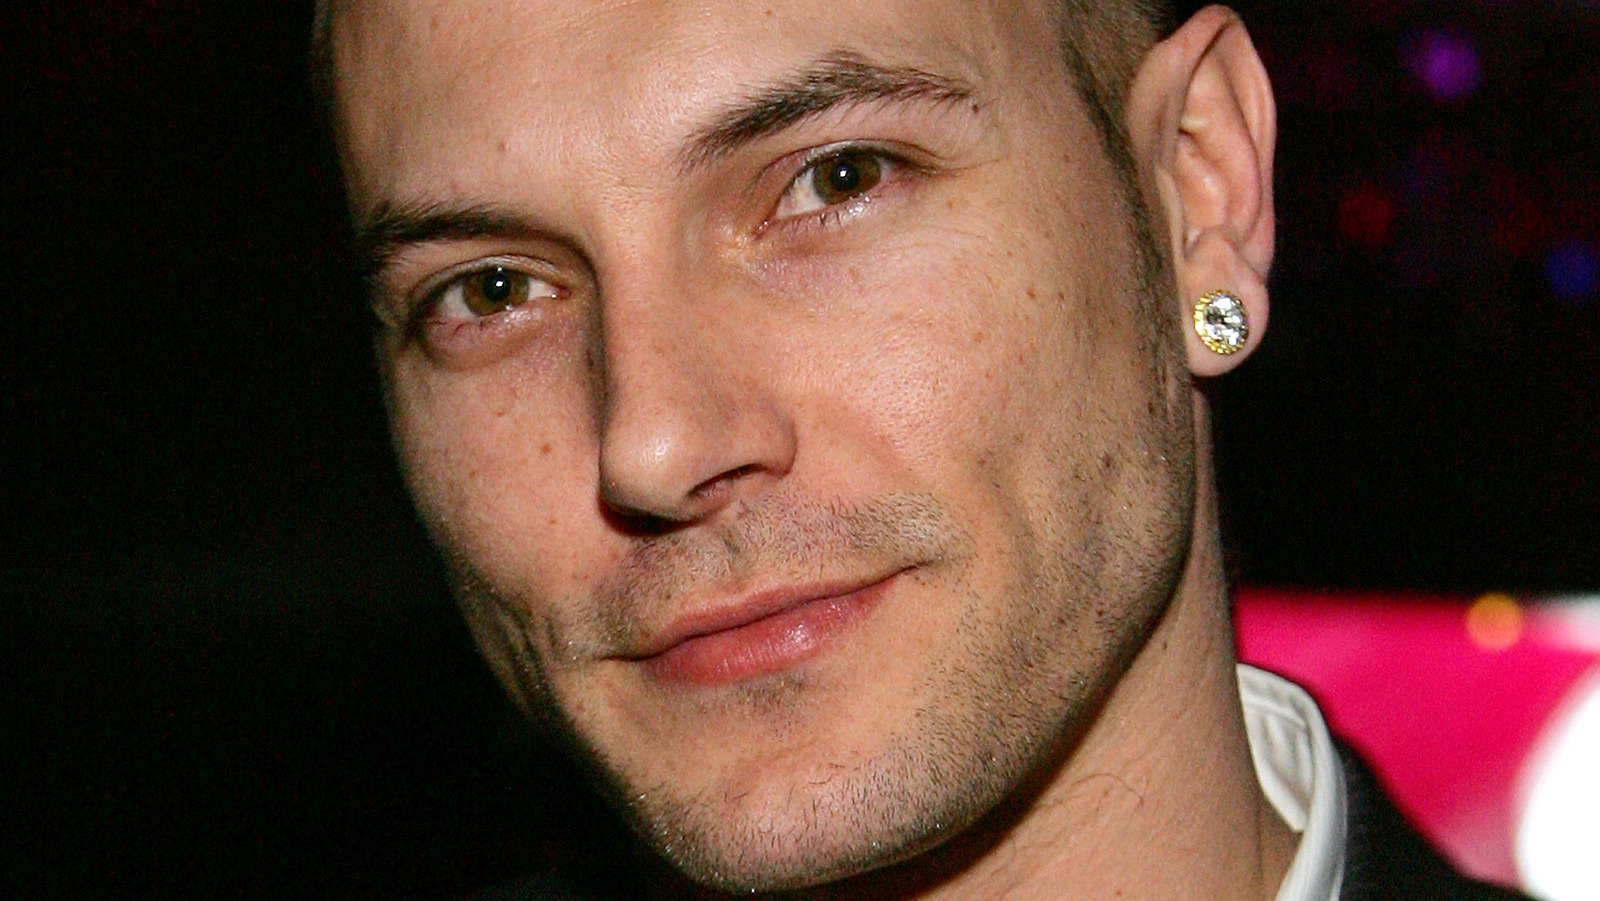 The Iconic Nickname Kevin Federline Received After His Split With Britney Spears 